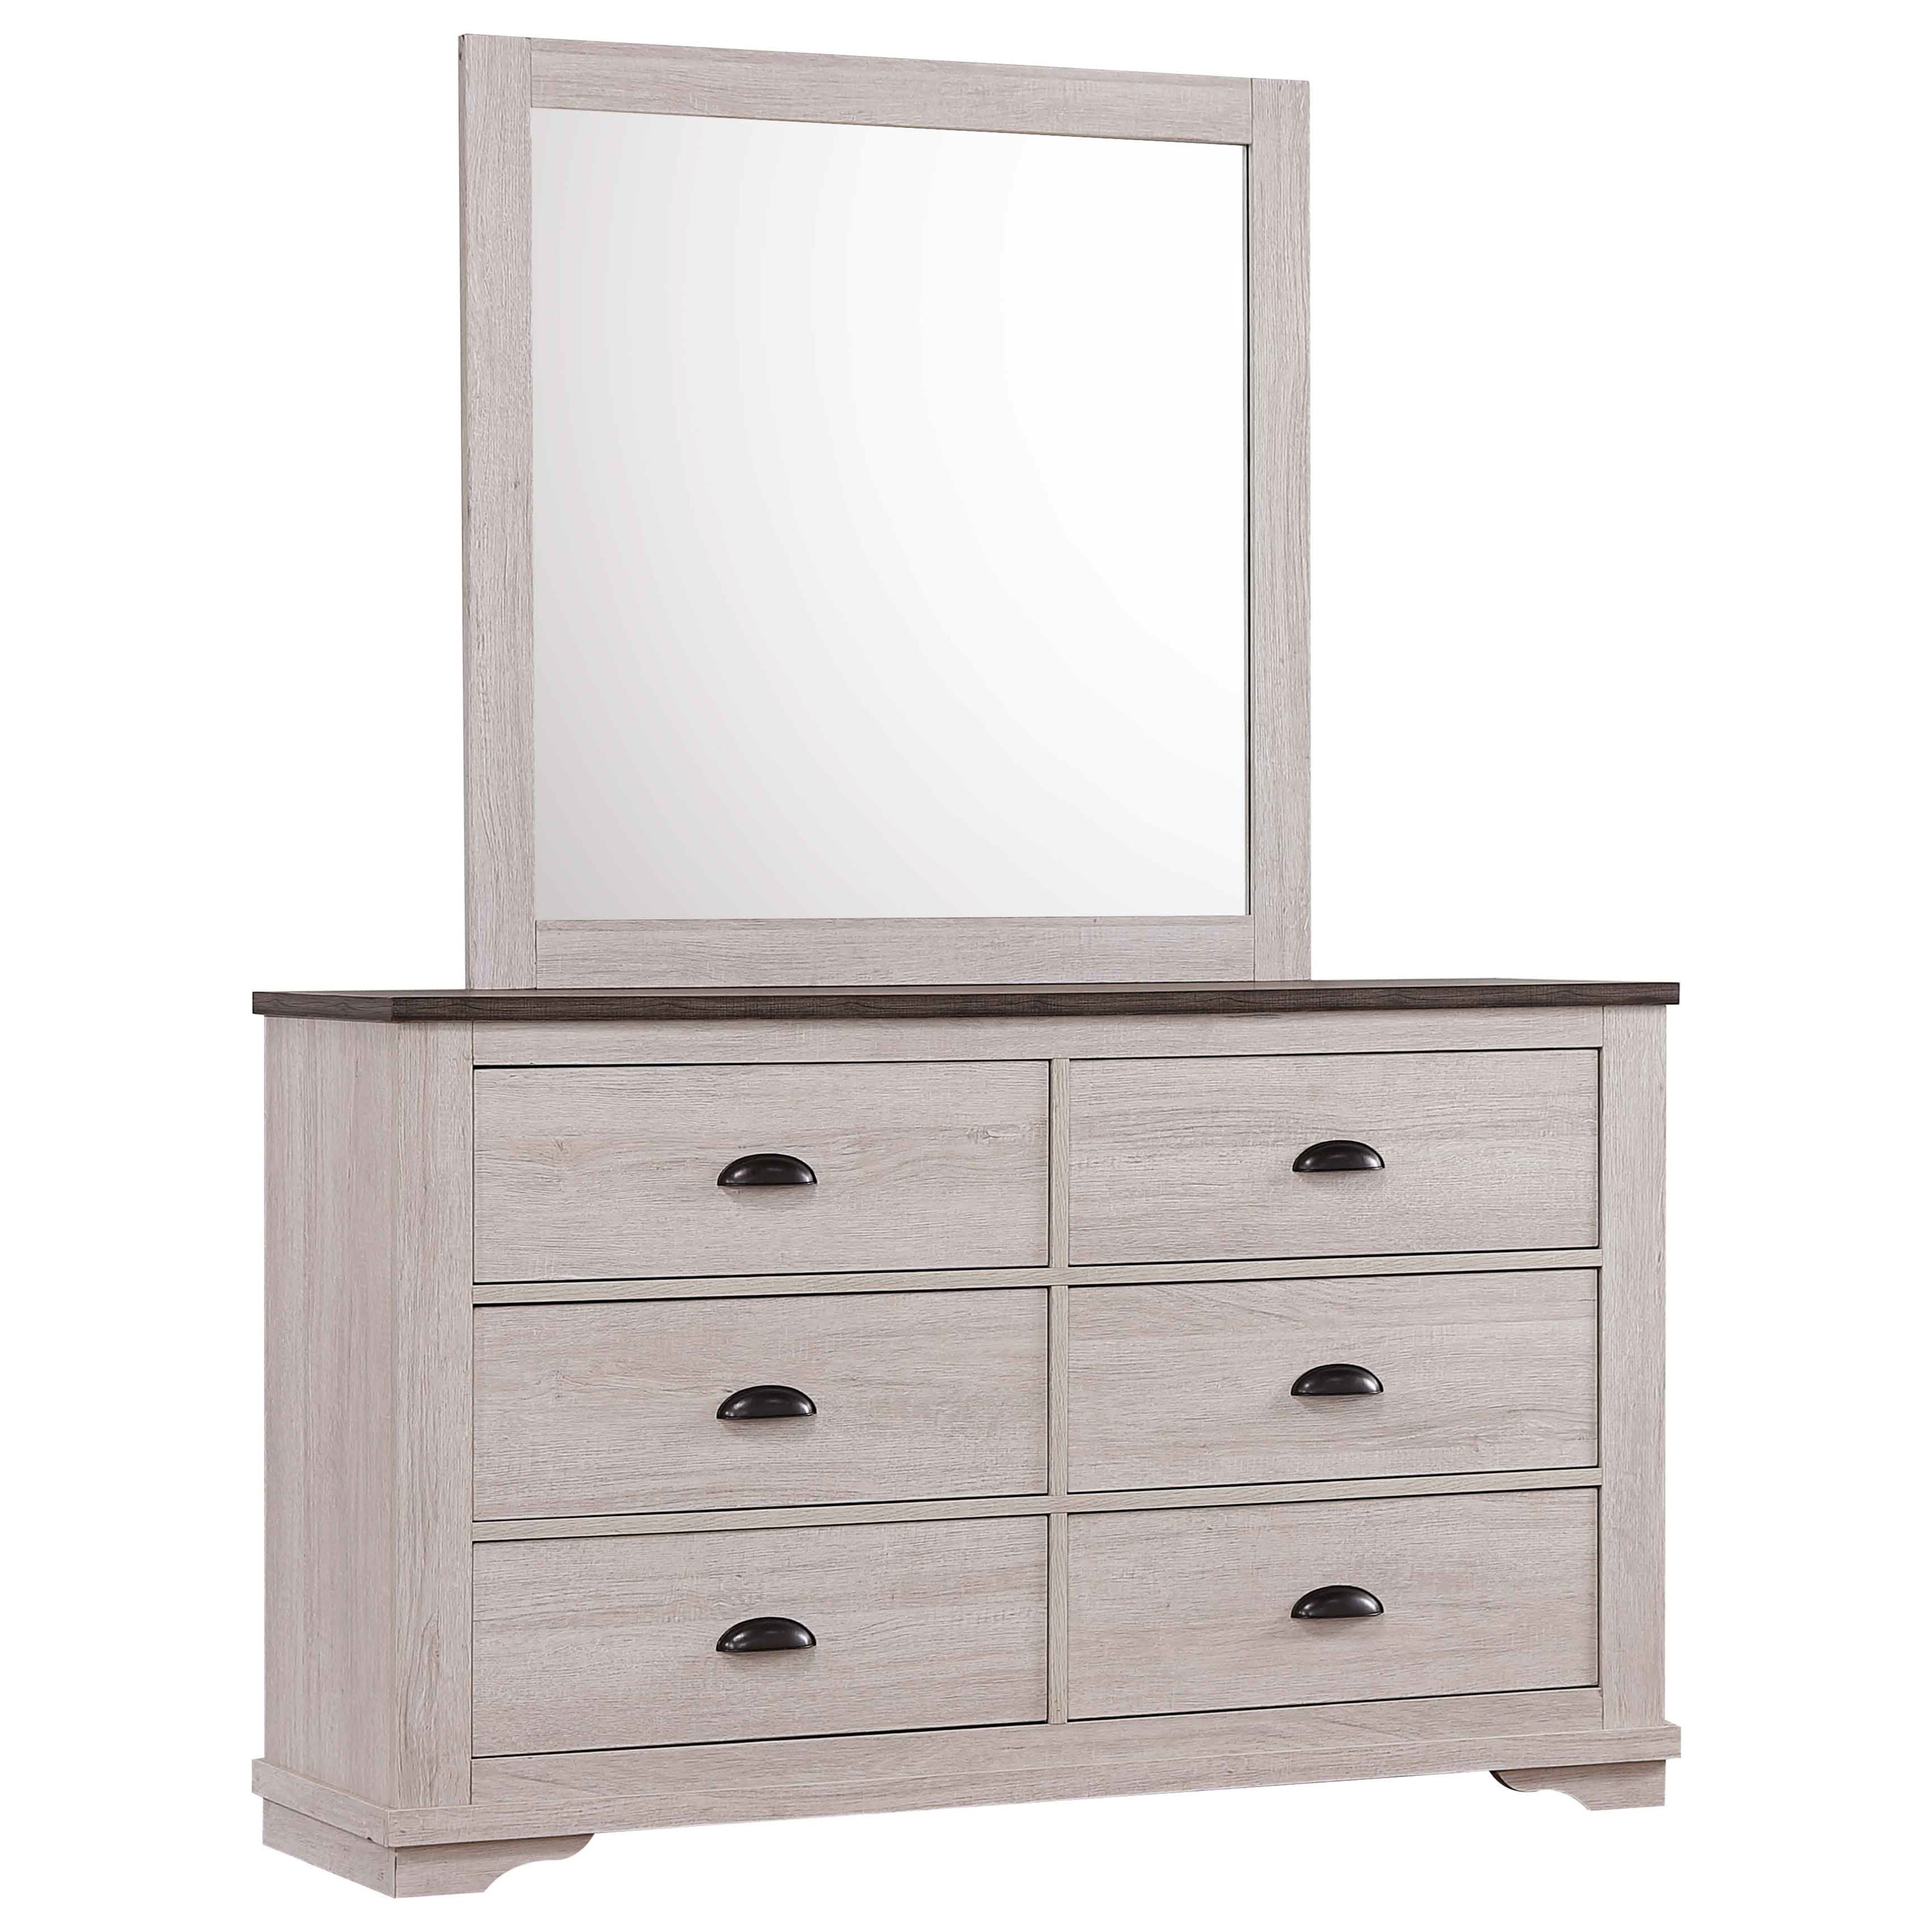 Transitional Style 5 Piece Queen Size, White Panel Bed Set, Dresser, Mirror, Nightstand, Elegant Look Furniture - image 4 of 6